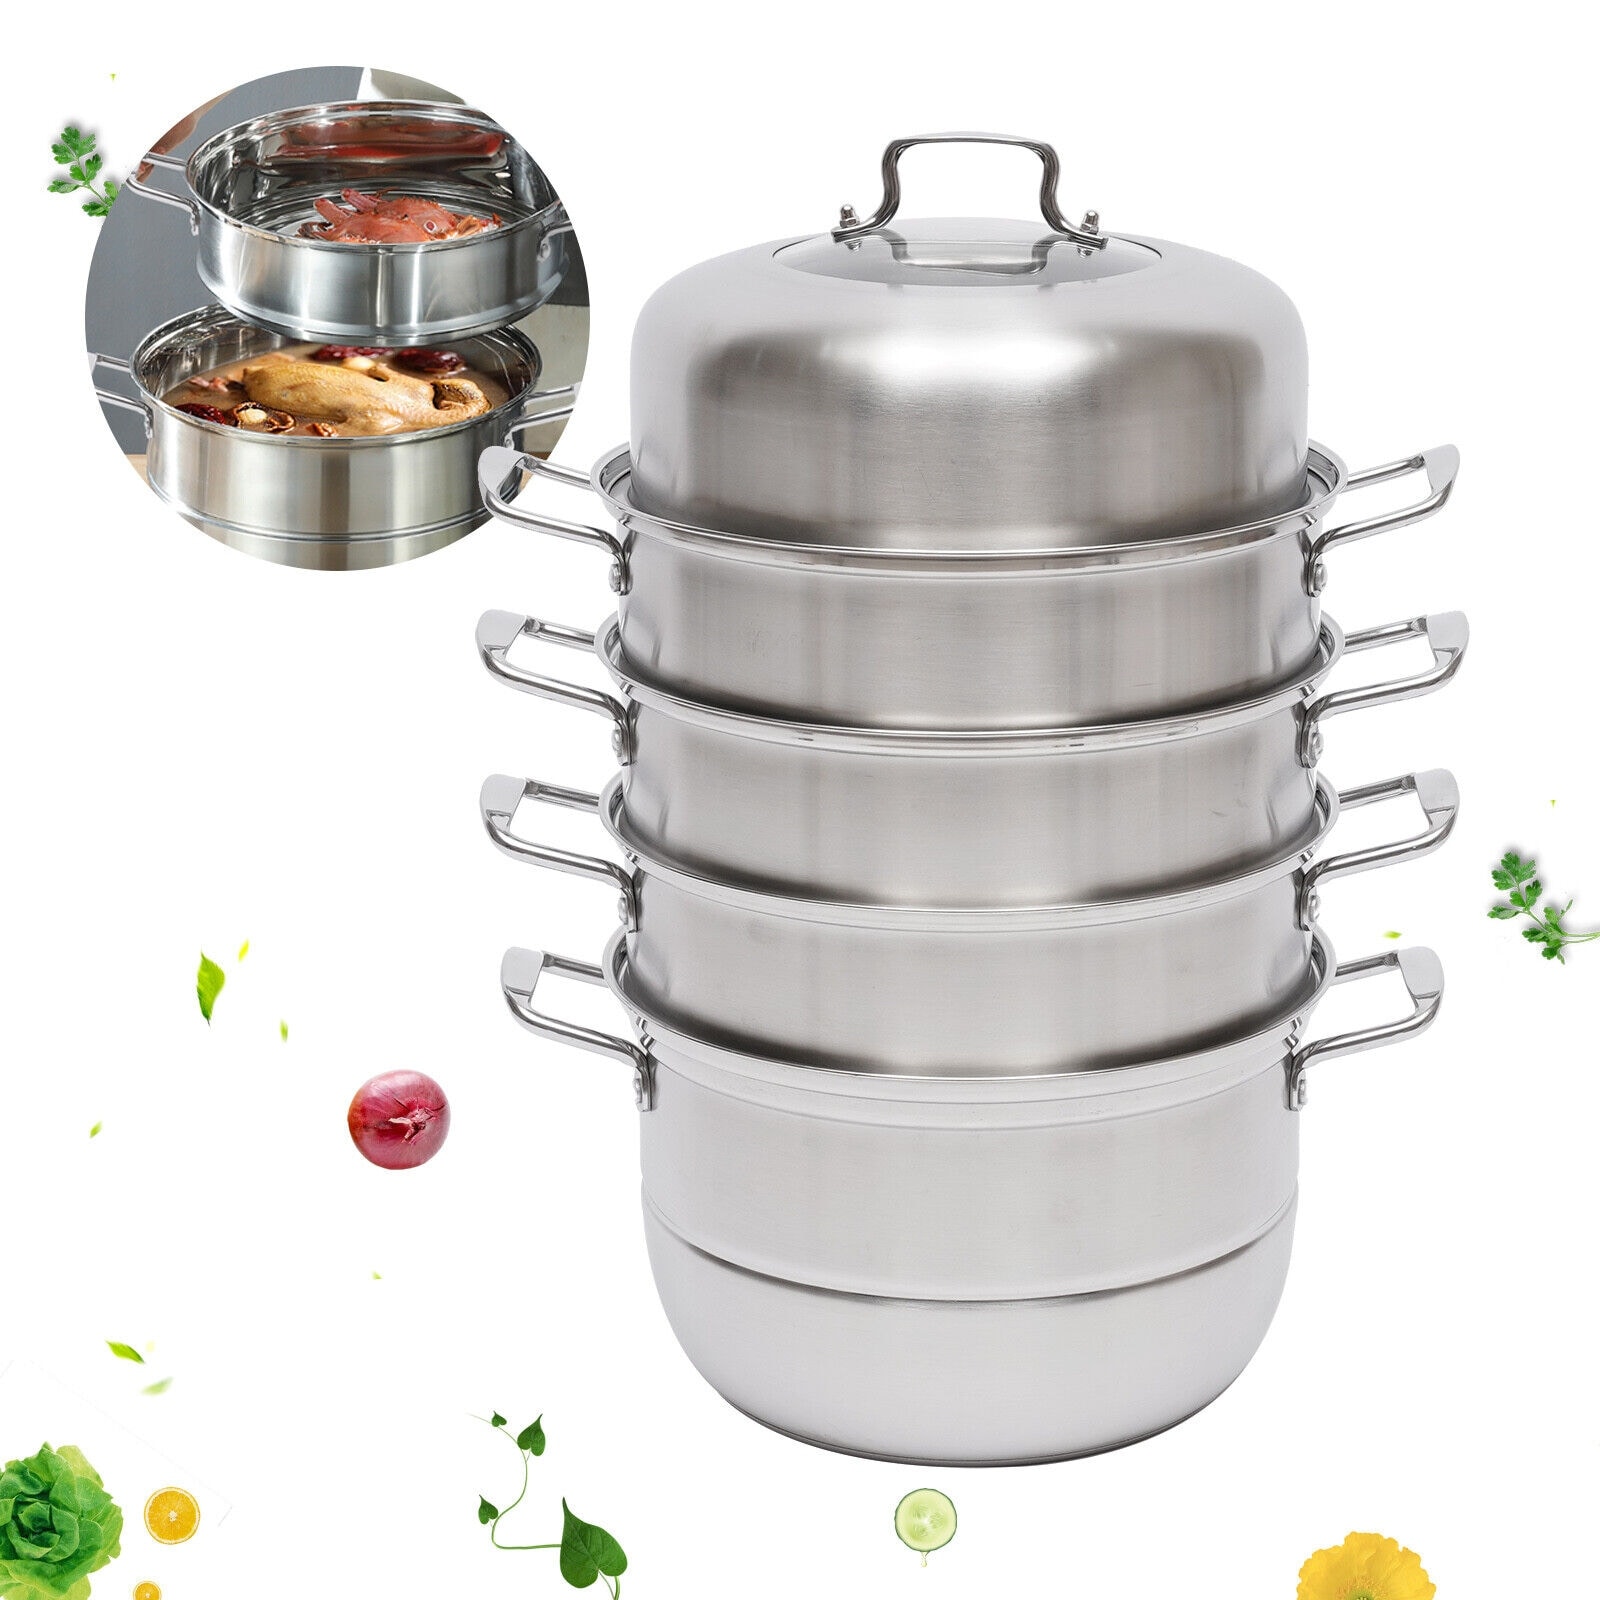 https://ak1.ostkcdn.com/images/products/is/images/direct/1bdbd42598289b139c68e74954be5397d3aa6d59/5-Tier-Stainless-Steel-Steamer-Pot-Set.jpg